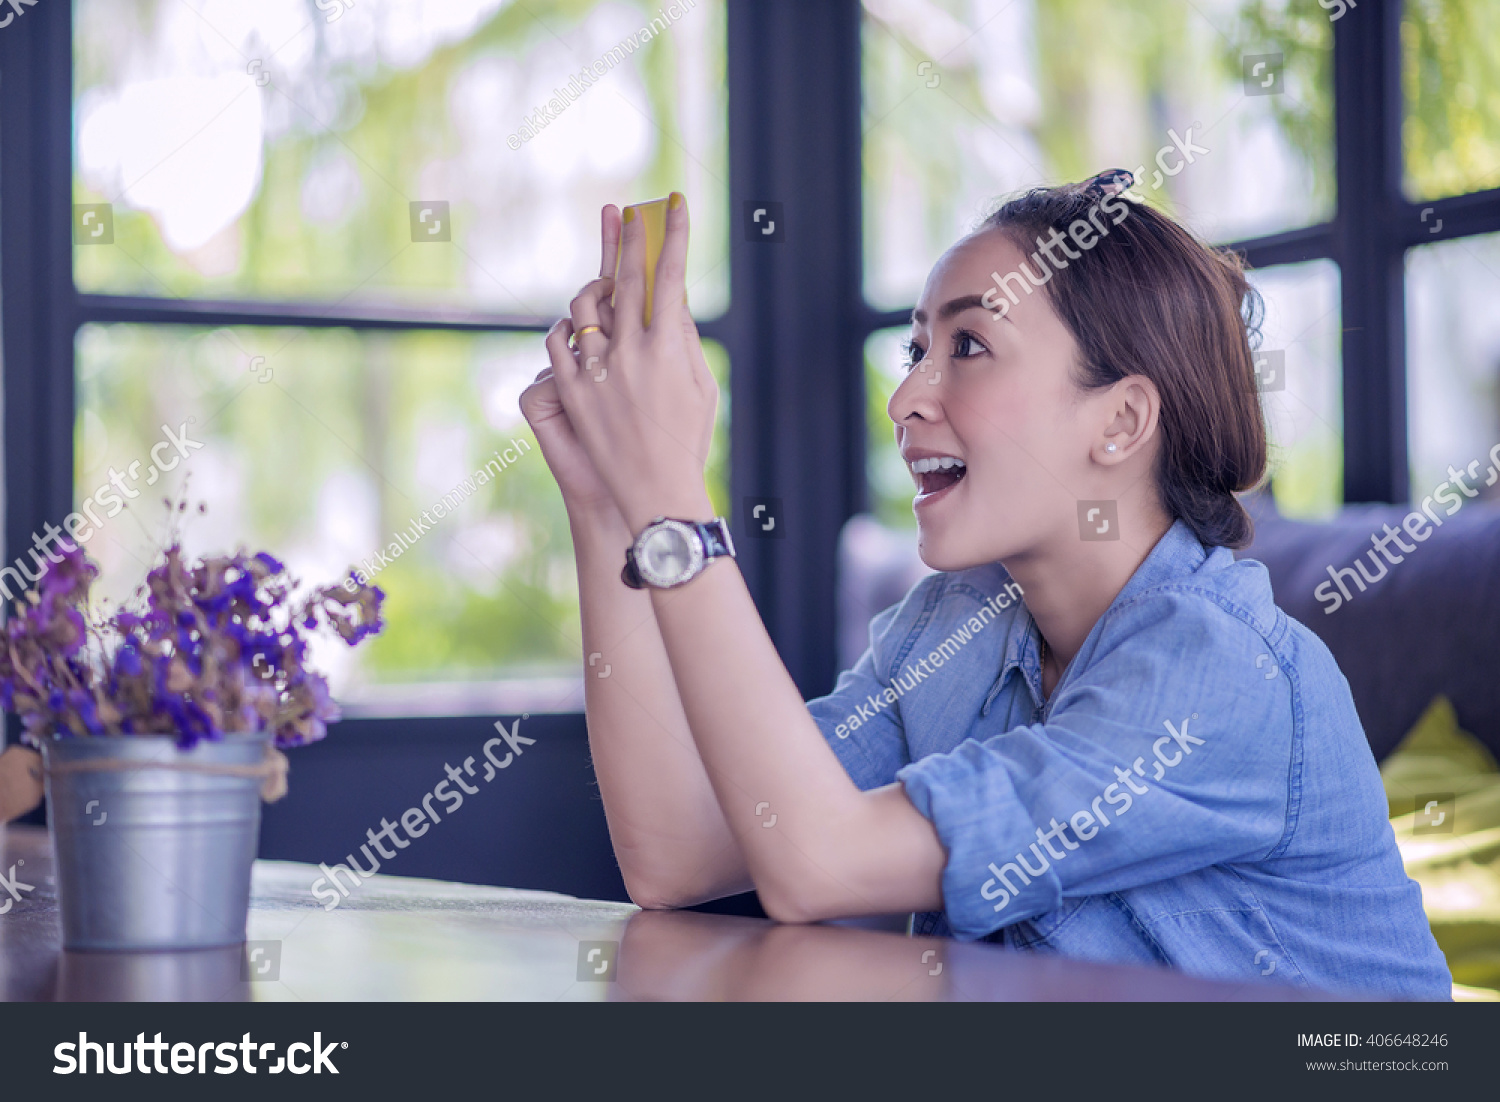 Beautiful young Asian woman being looking at phone seeing surprised message news or photos there with disgusting emotion on her face #406648246